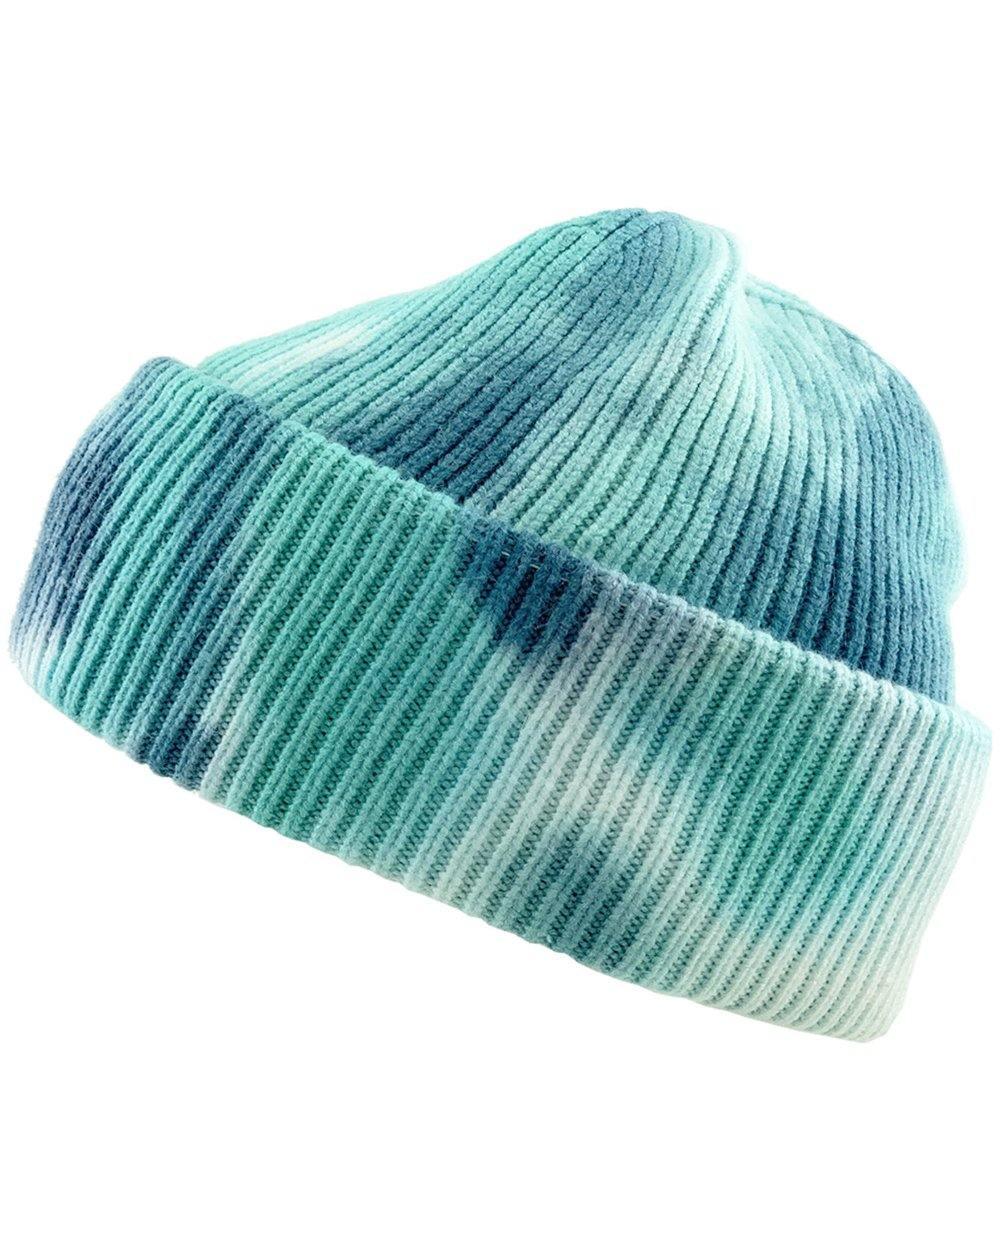 Embroidered Tie Dye Beanies - Constantly Create Shop